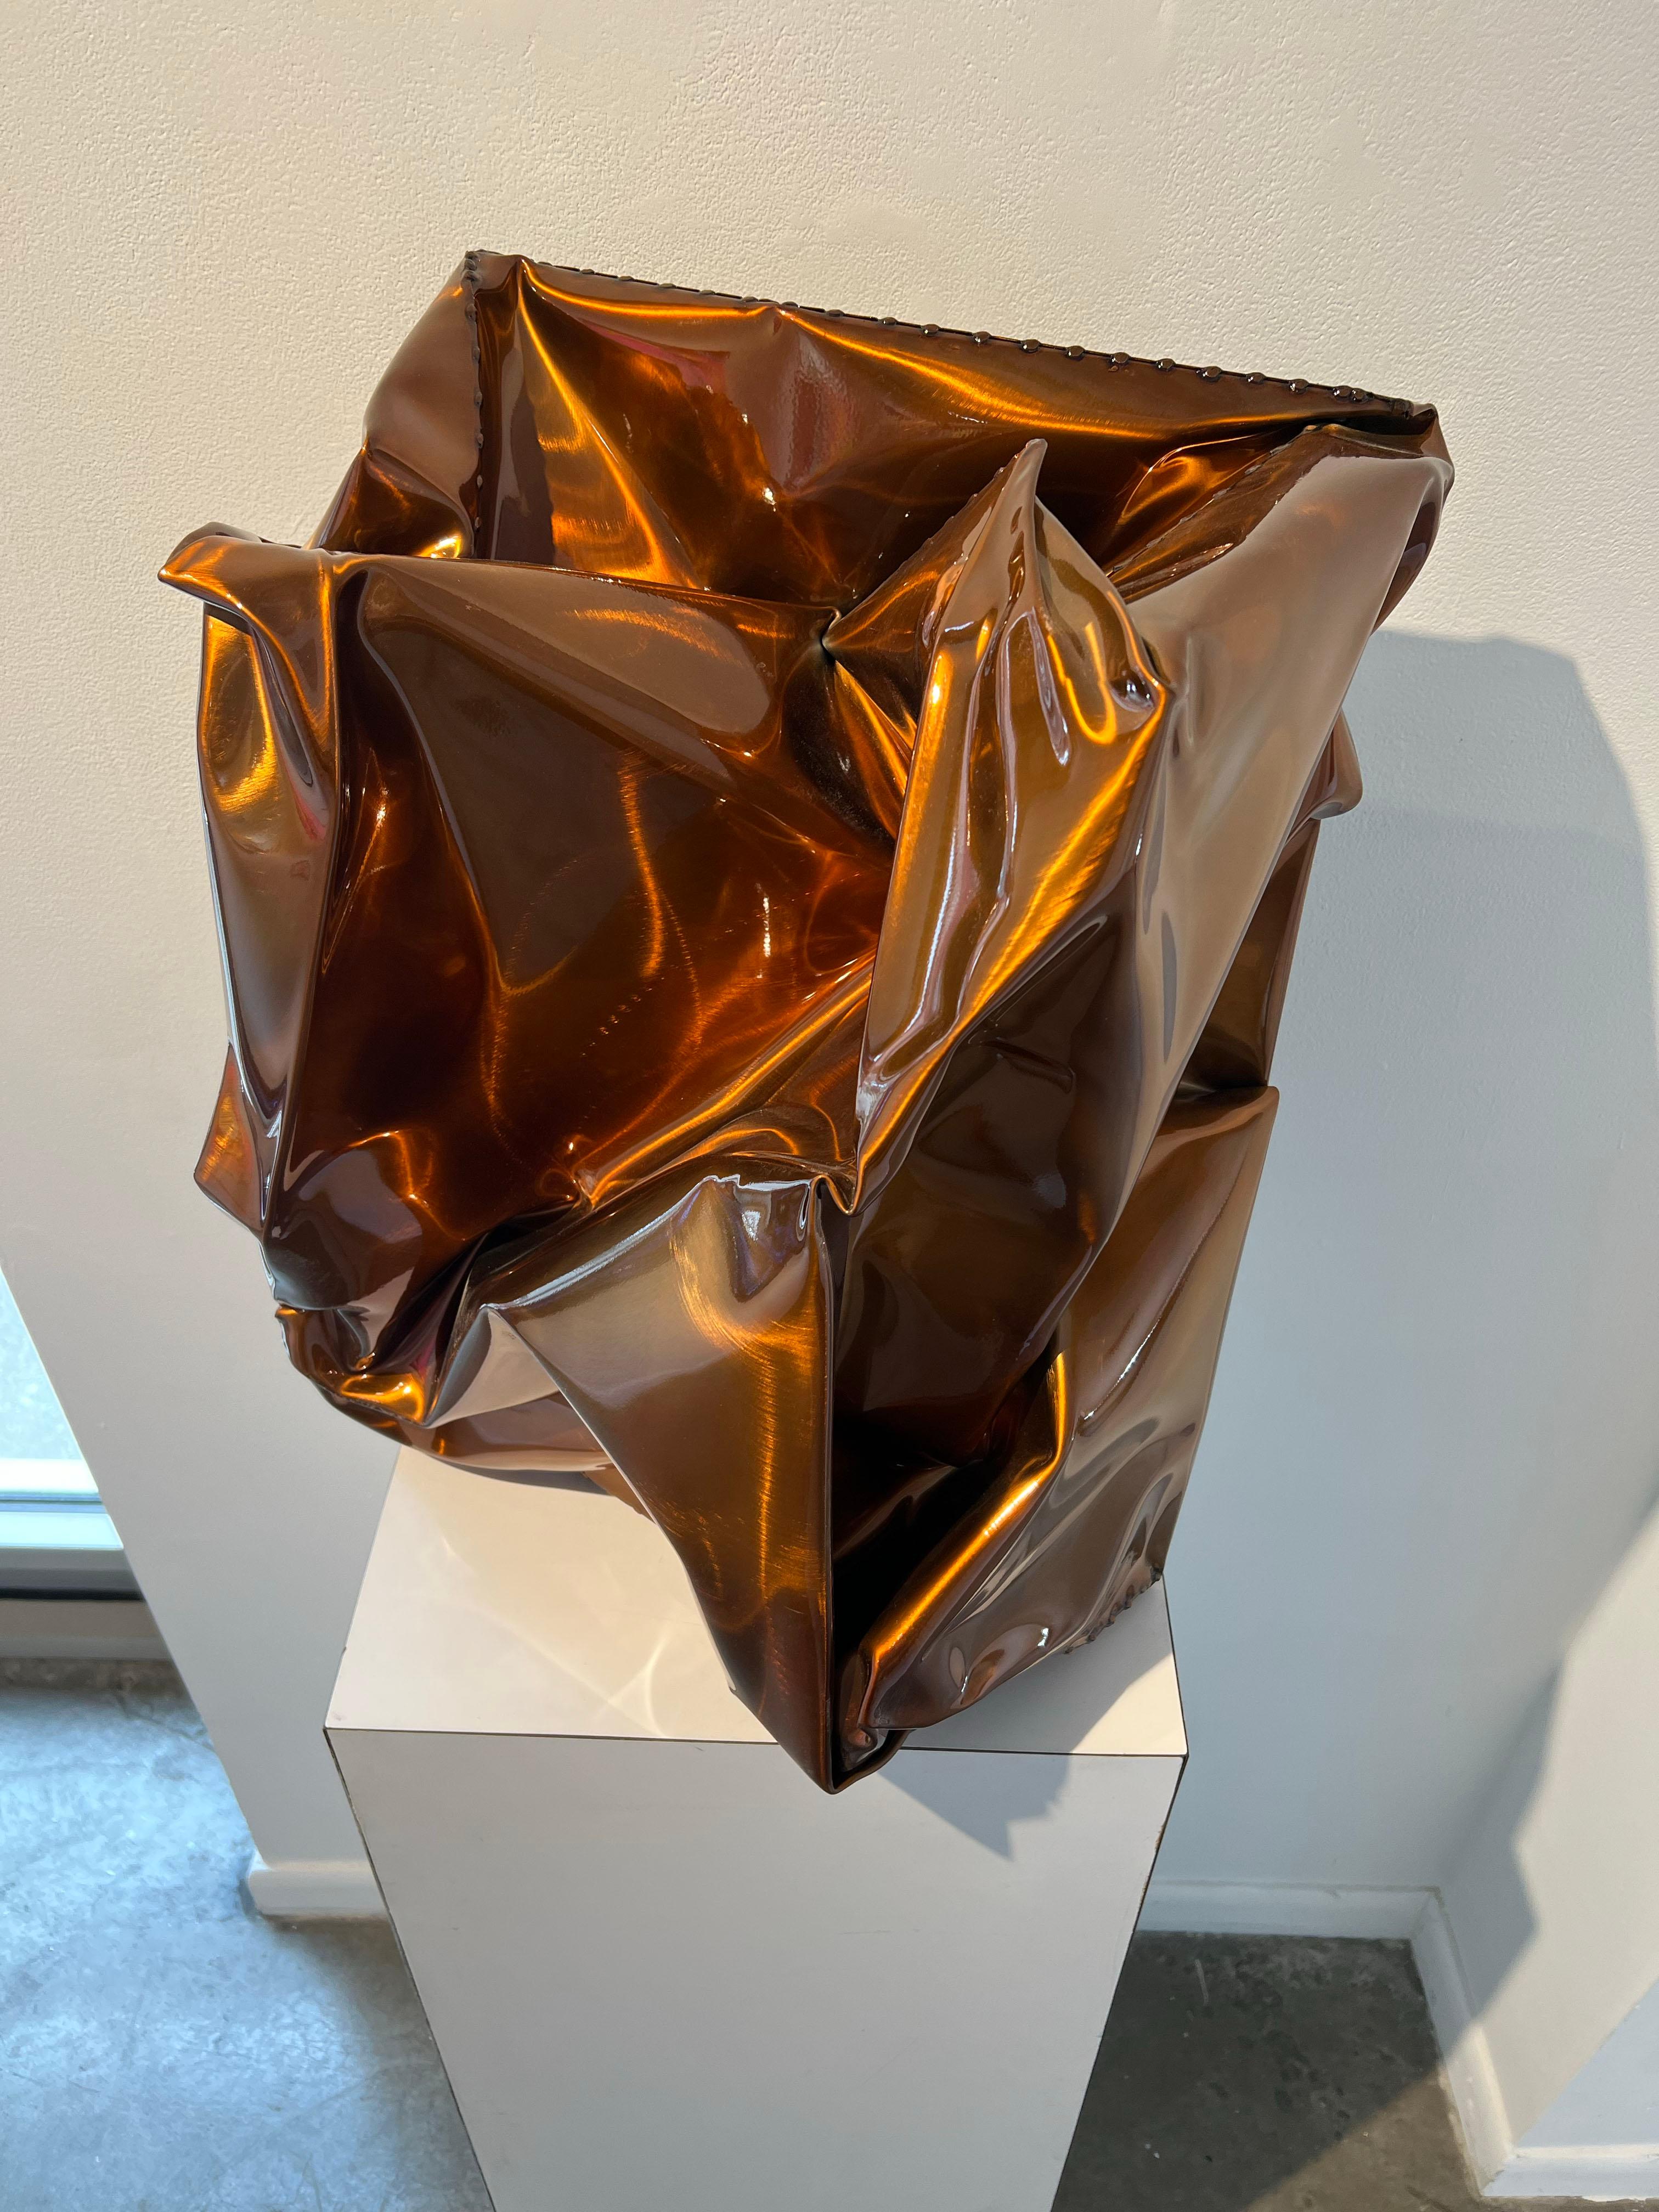 Chestnut - Abstract Sculpture by Rick Lazes